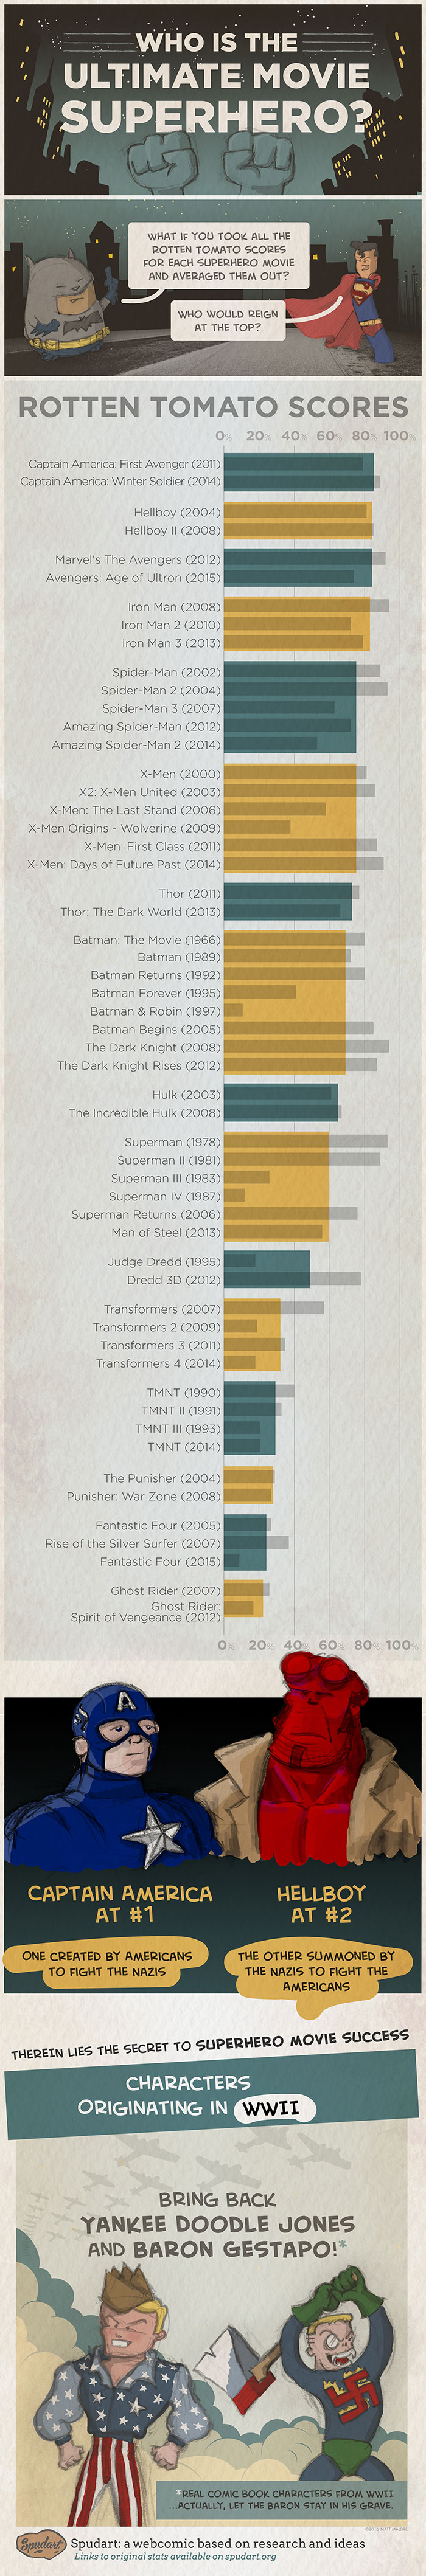 Who are the best superheroes by their movie ratings?